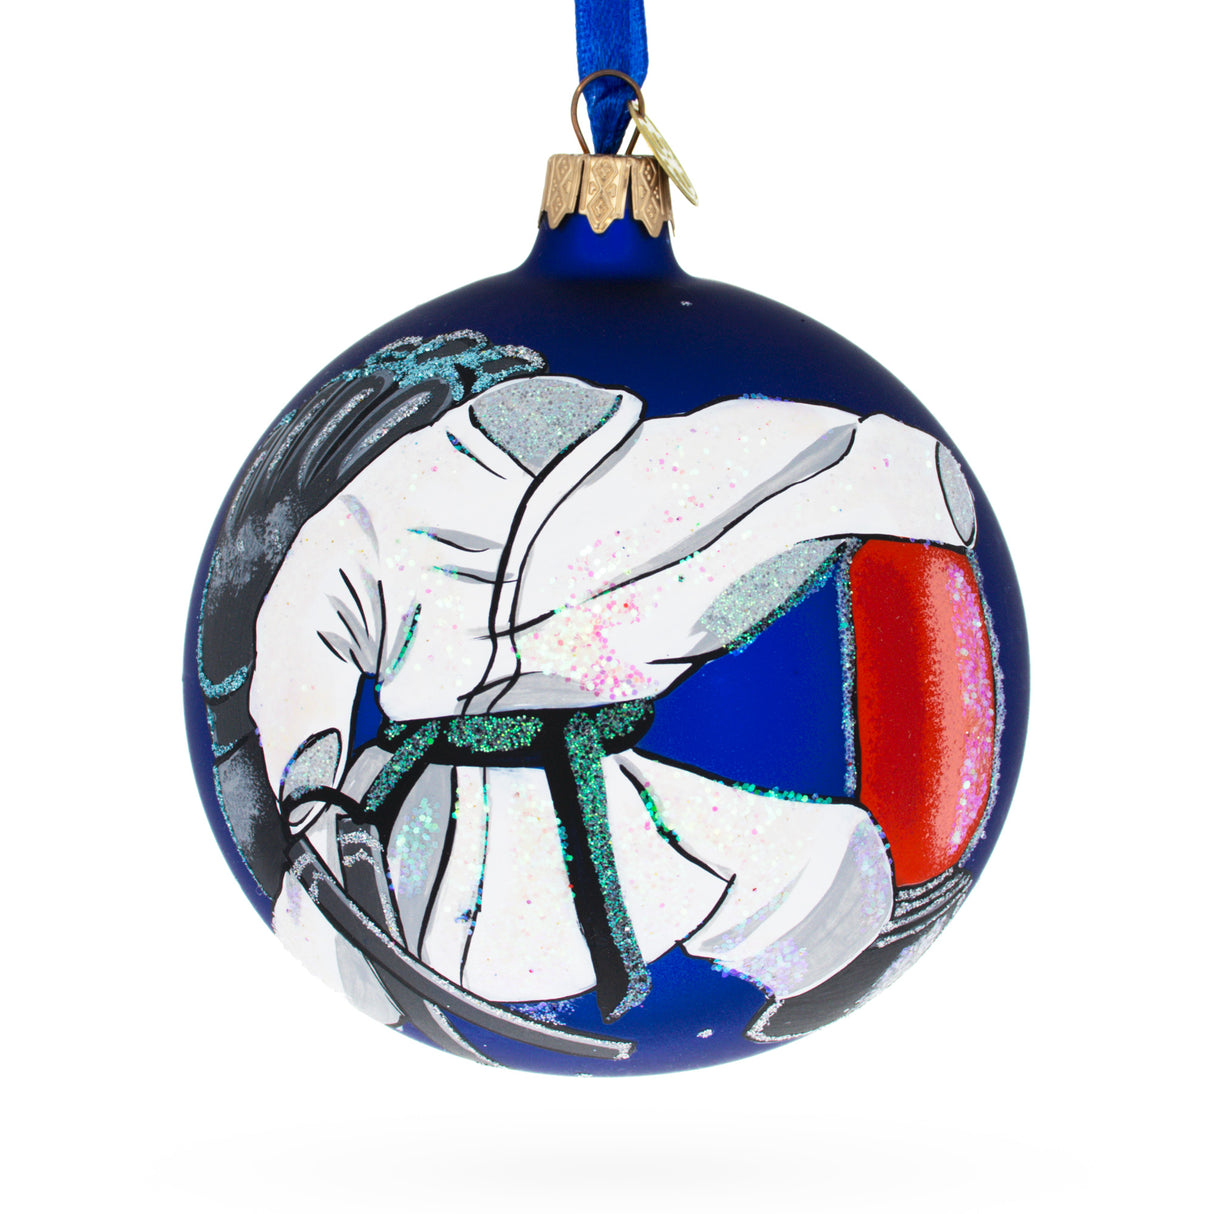 Glass Masterful Martial Arts: Martial Arts Blown Glass Ball Christmas Ornament 4 Inches in Blue color Round